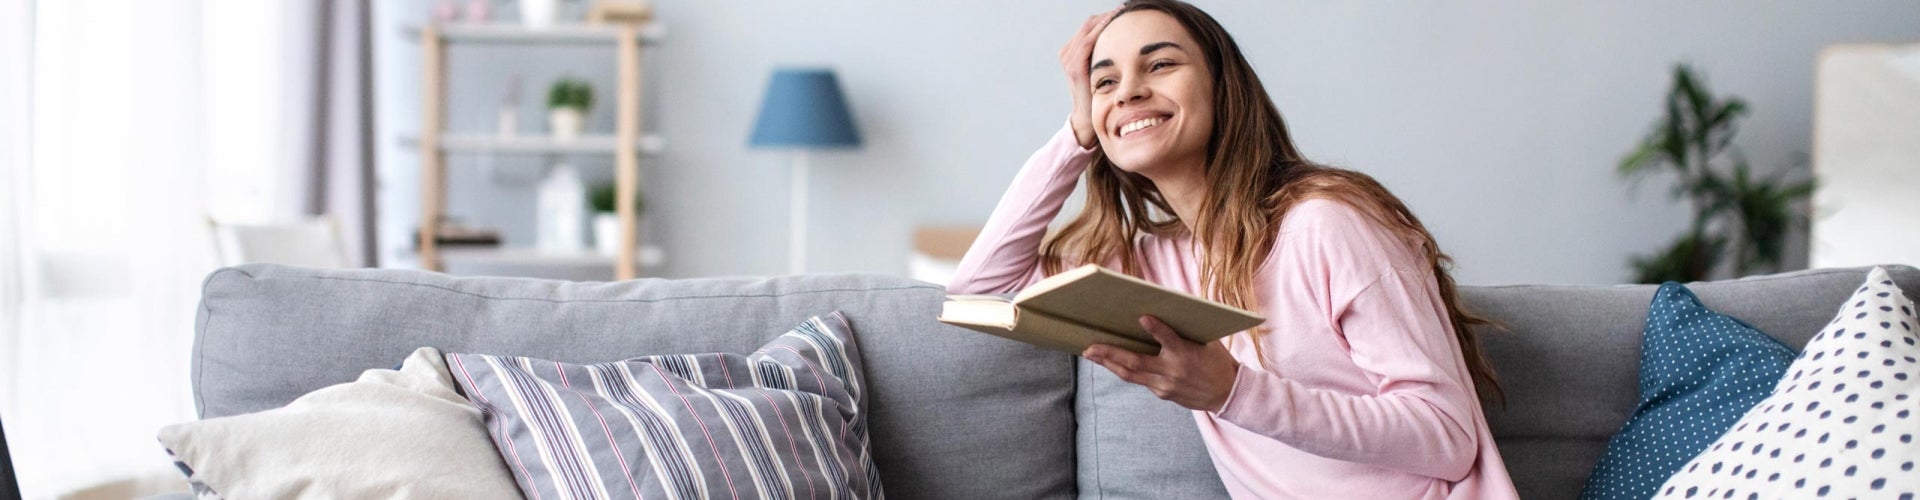 woman smiling while reading book on couch